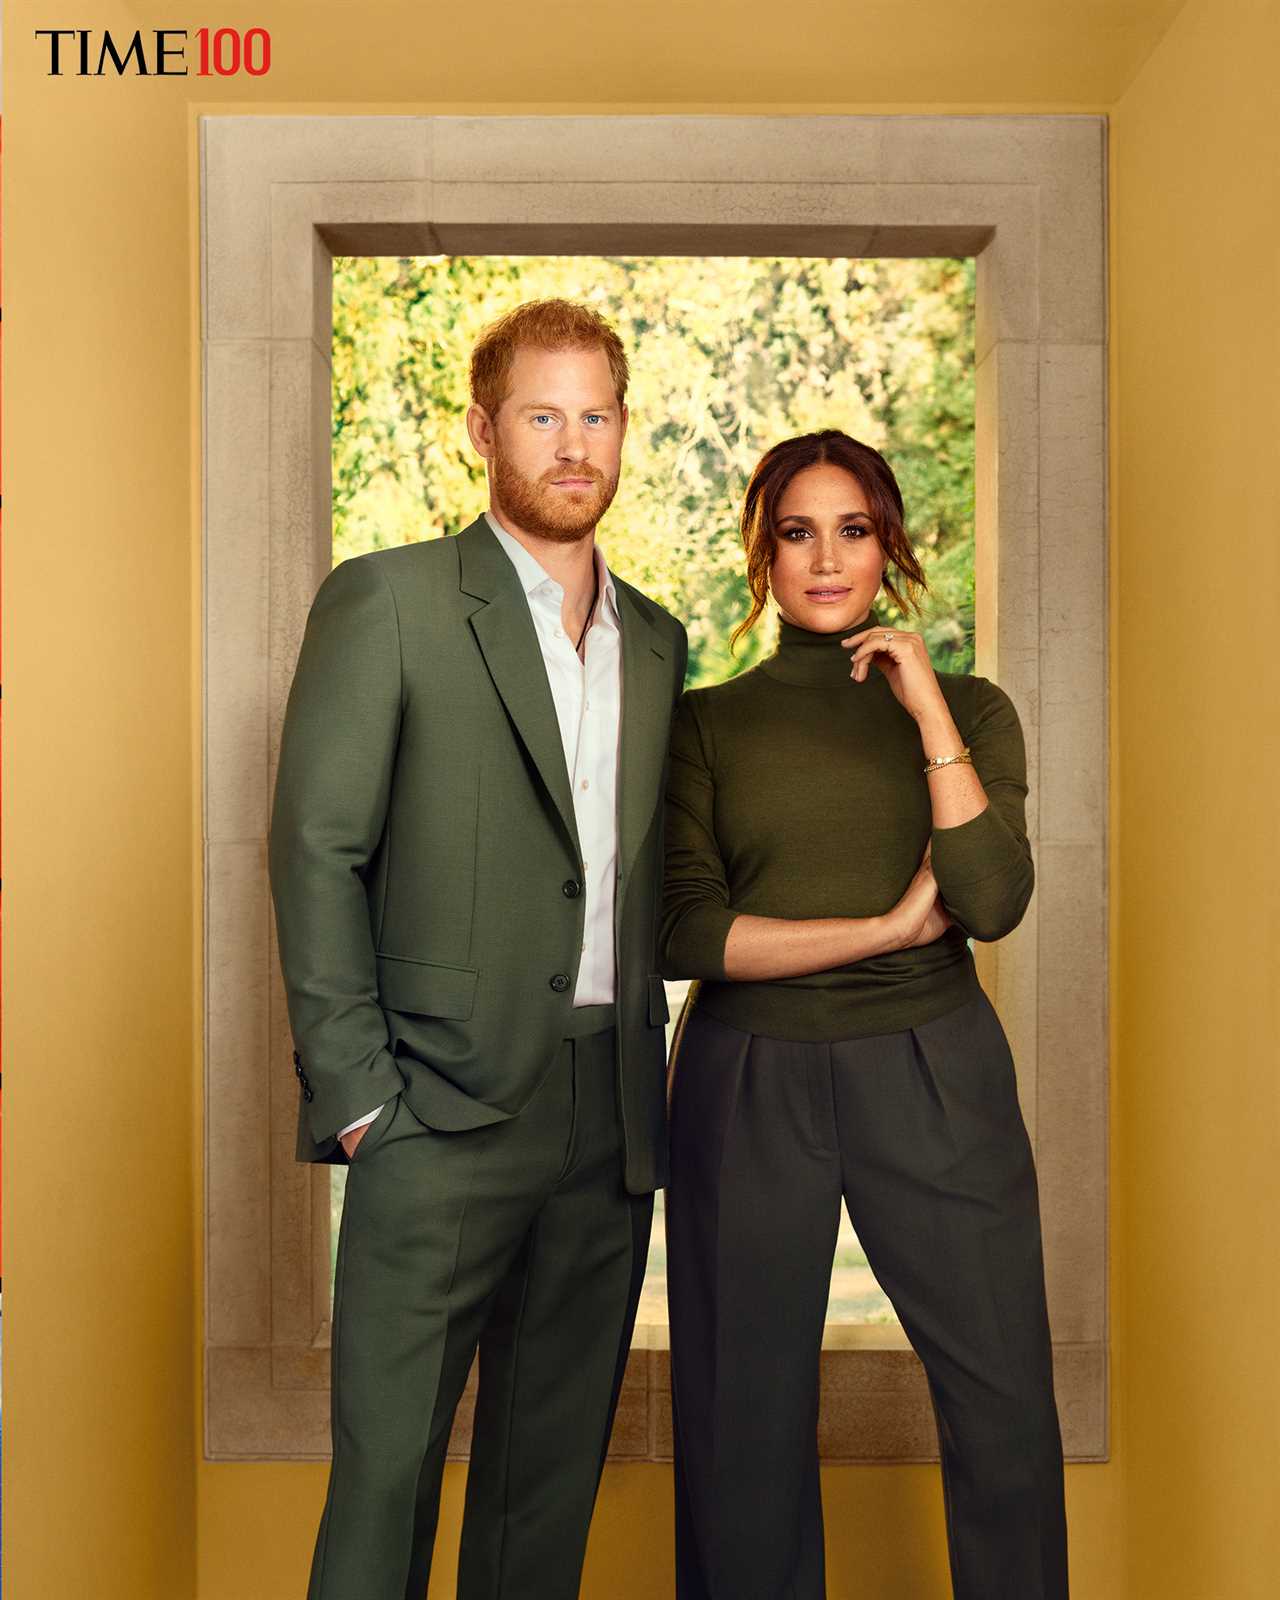 Meghan and Harry posed in matching green ensembles for the profile